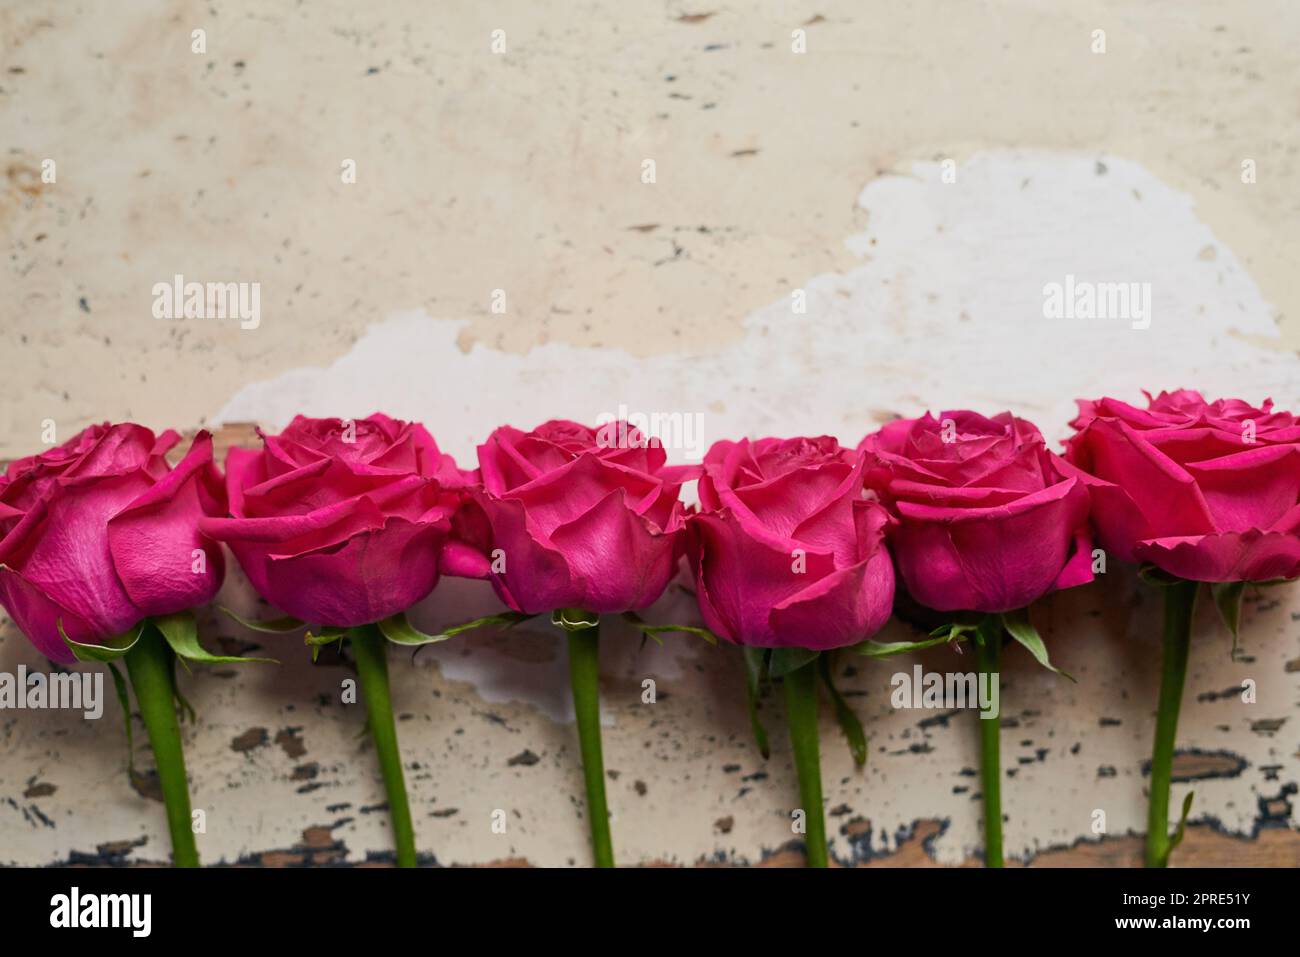 Flowers are a girls best friend. Studio shot of a bouquet of pink roses lined up next to each other while resting against a grey background. Stock Photo